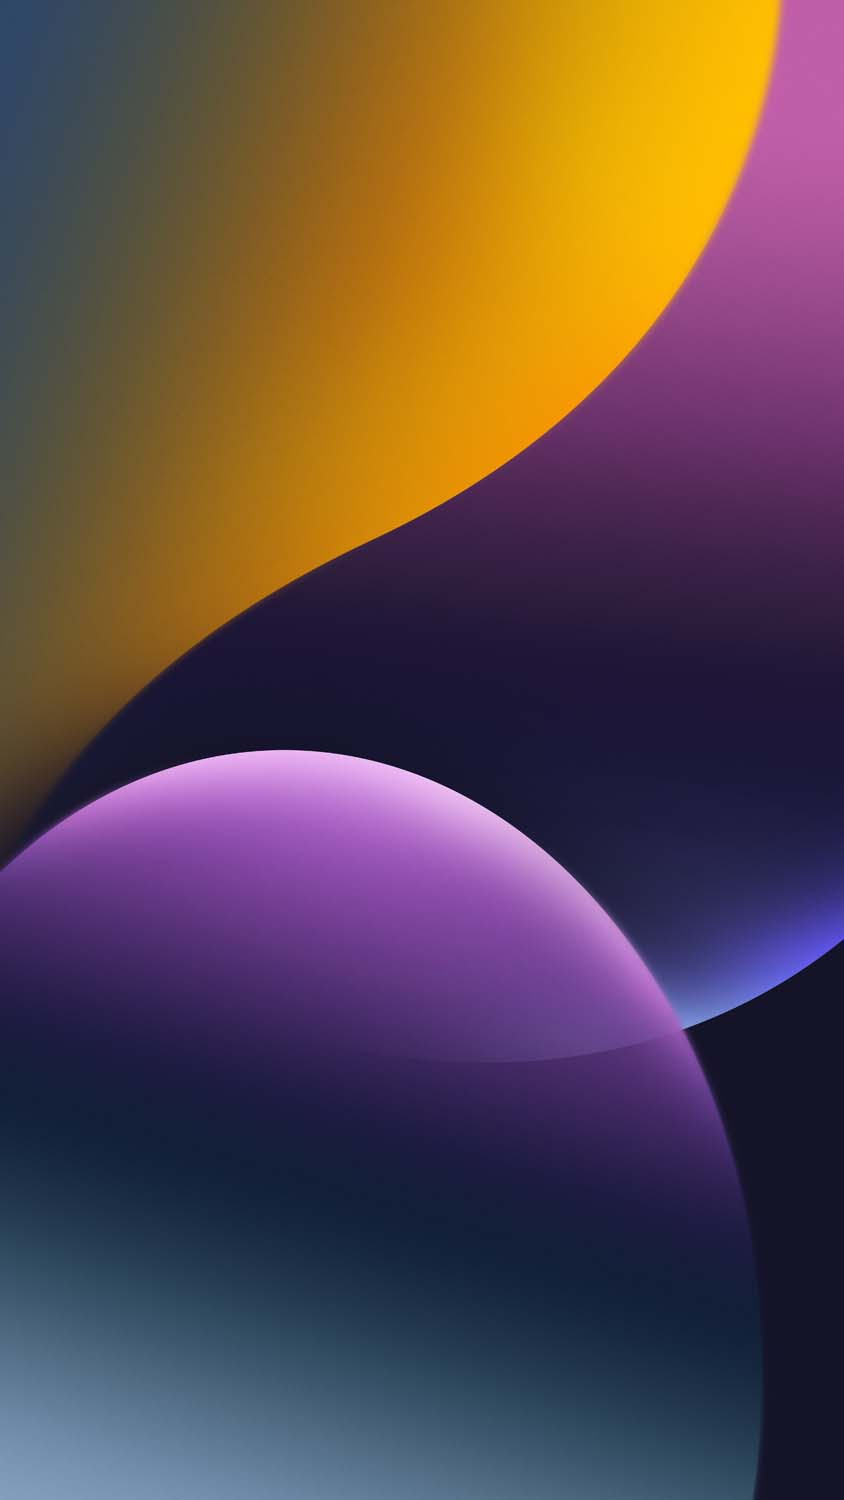 Abstract Shapes iOS iPhone Wallpaper 4K  iPhone Wallpapers